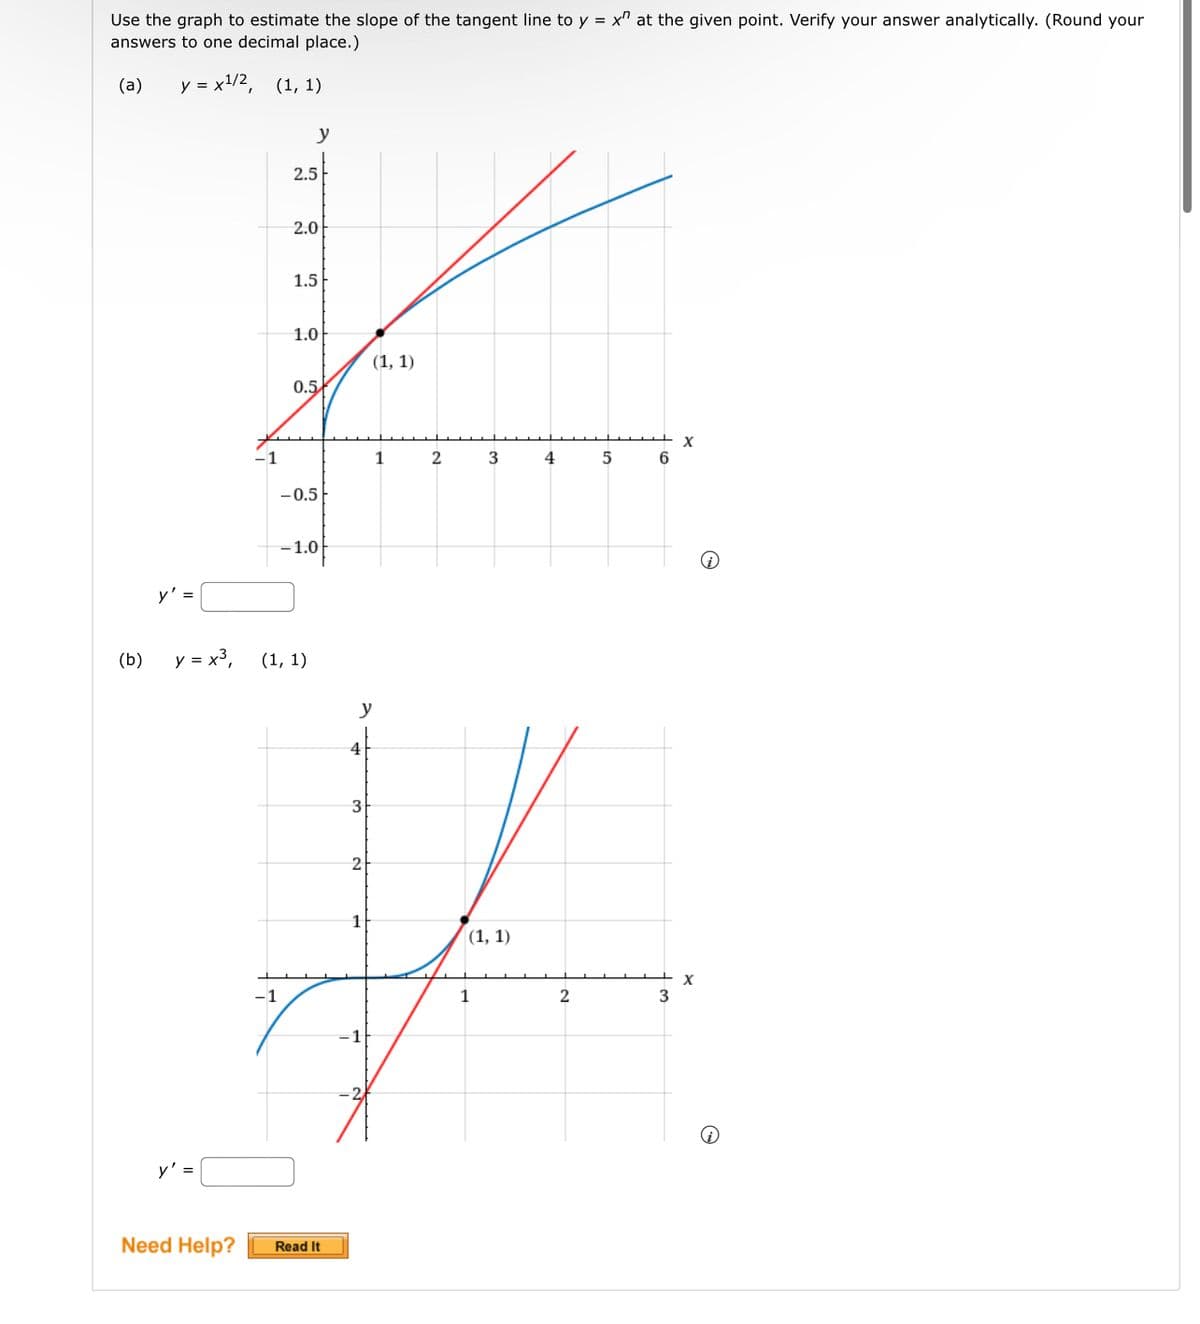 Use the graph to estimate the slope of the tangent line to y = x at the given point. Verify your answer analytically. (Round your
answers to one decimal place.)
(a)
y = x¹/2, (1, 1)
(b)
y' =
y = x³,
Need Help?
-1
-1
y
2.5
2.0
1.5
1.0
0.5
-0.5
(1, 1)
-1.0
Read It
y
4
3
2
(1, 1)
1
1
2
3
(1, 1)
1
4
2
5
6
3
X
X